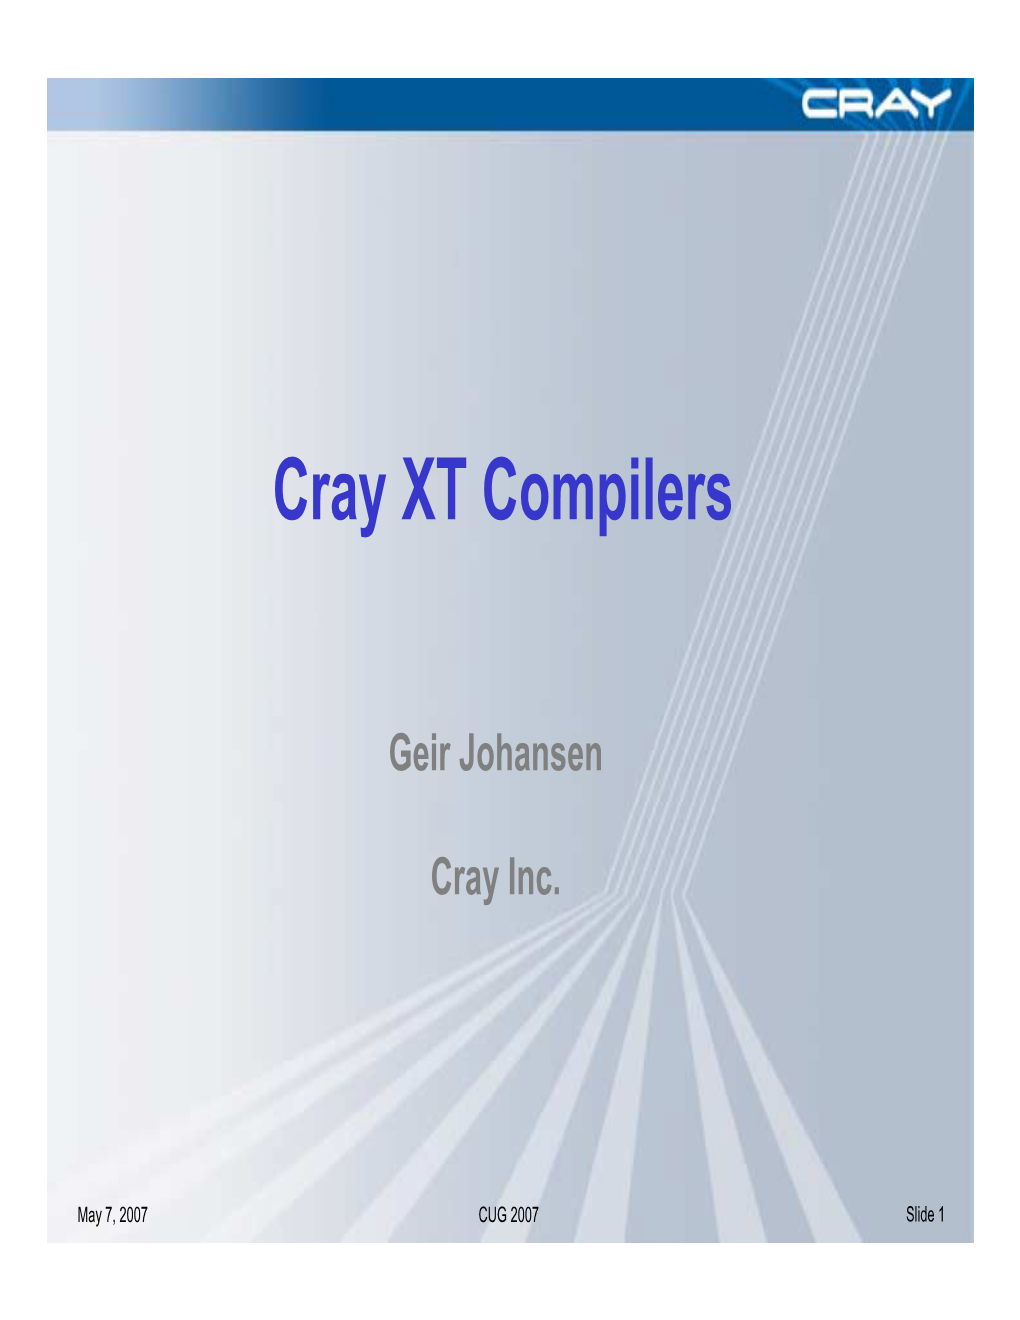 Cray XT Compilers